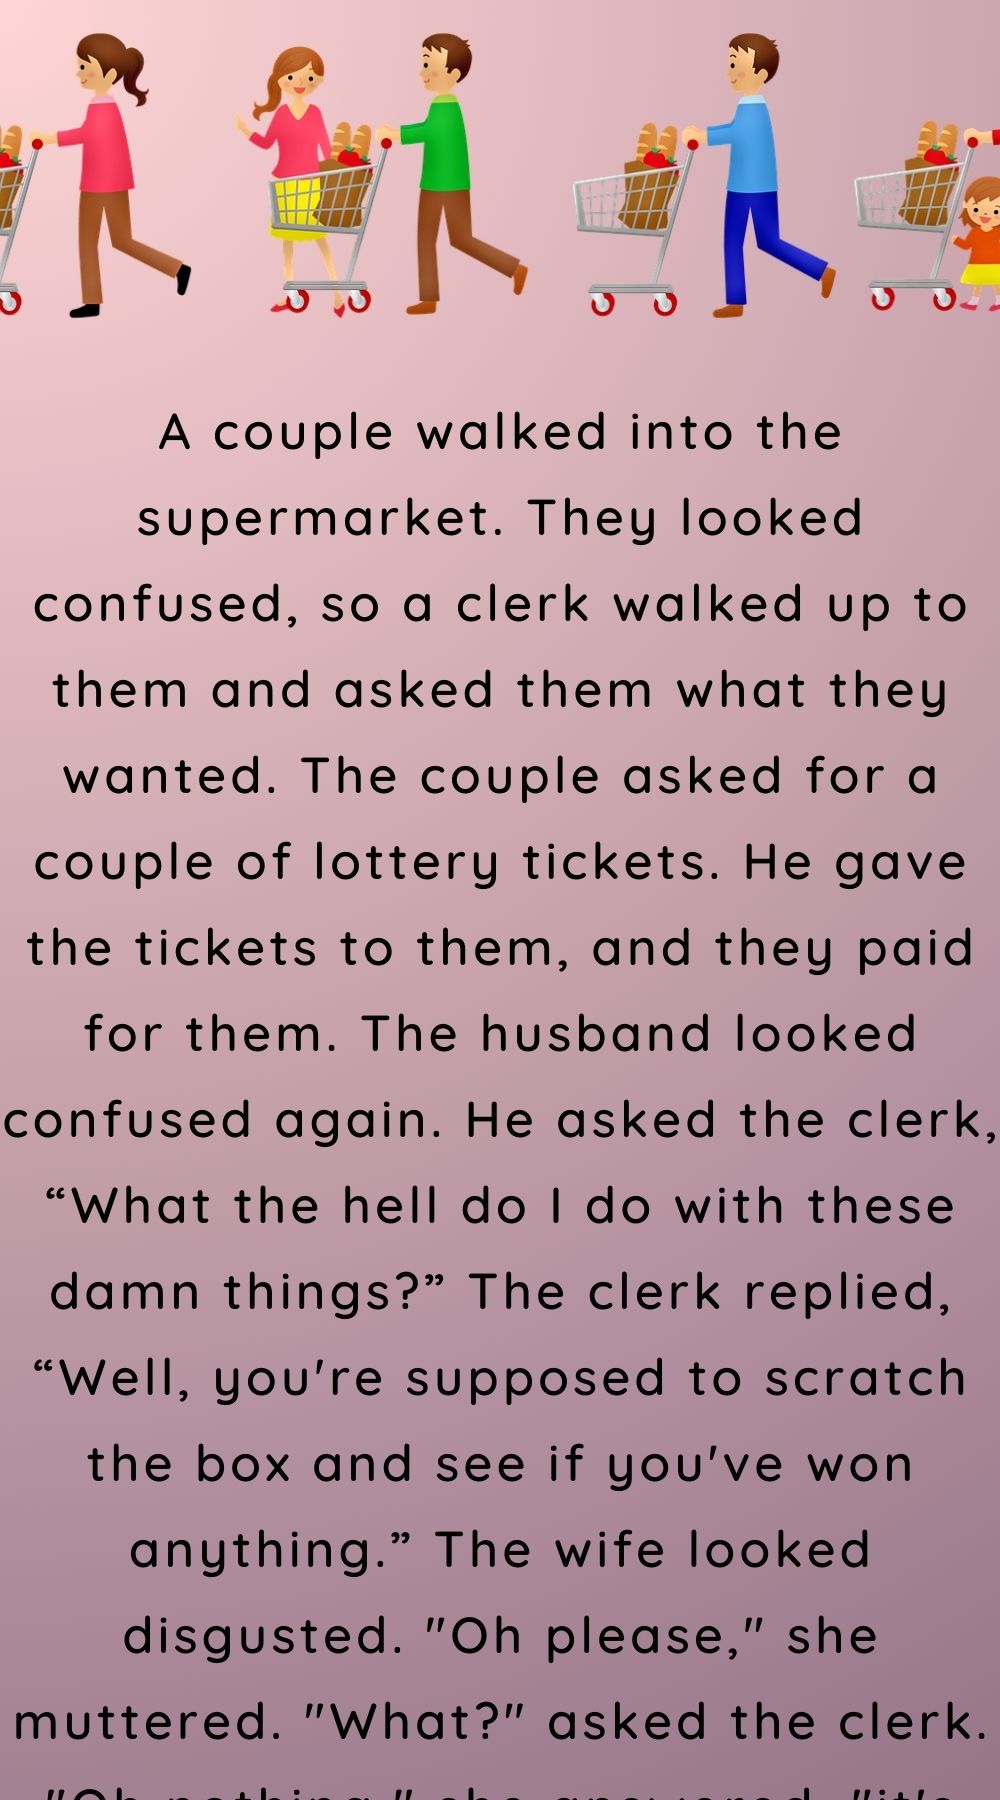 A couple walked into the supermarket